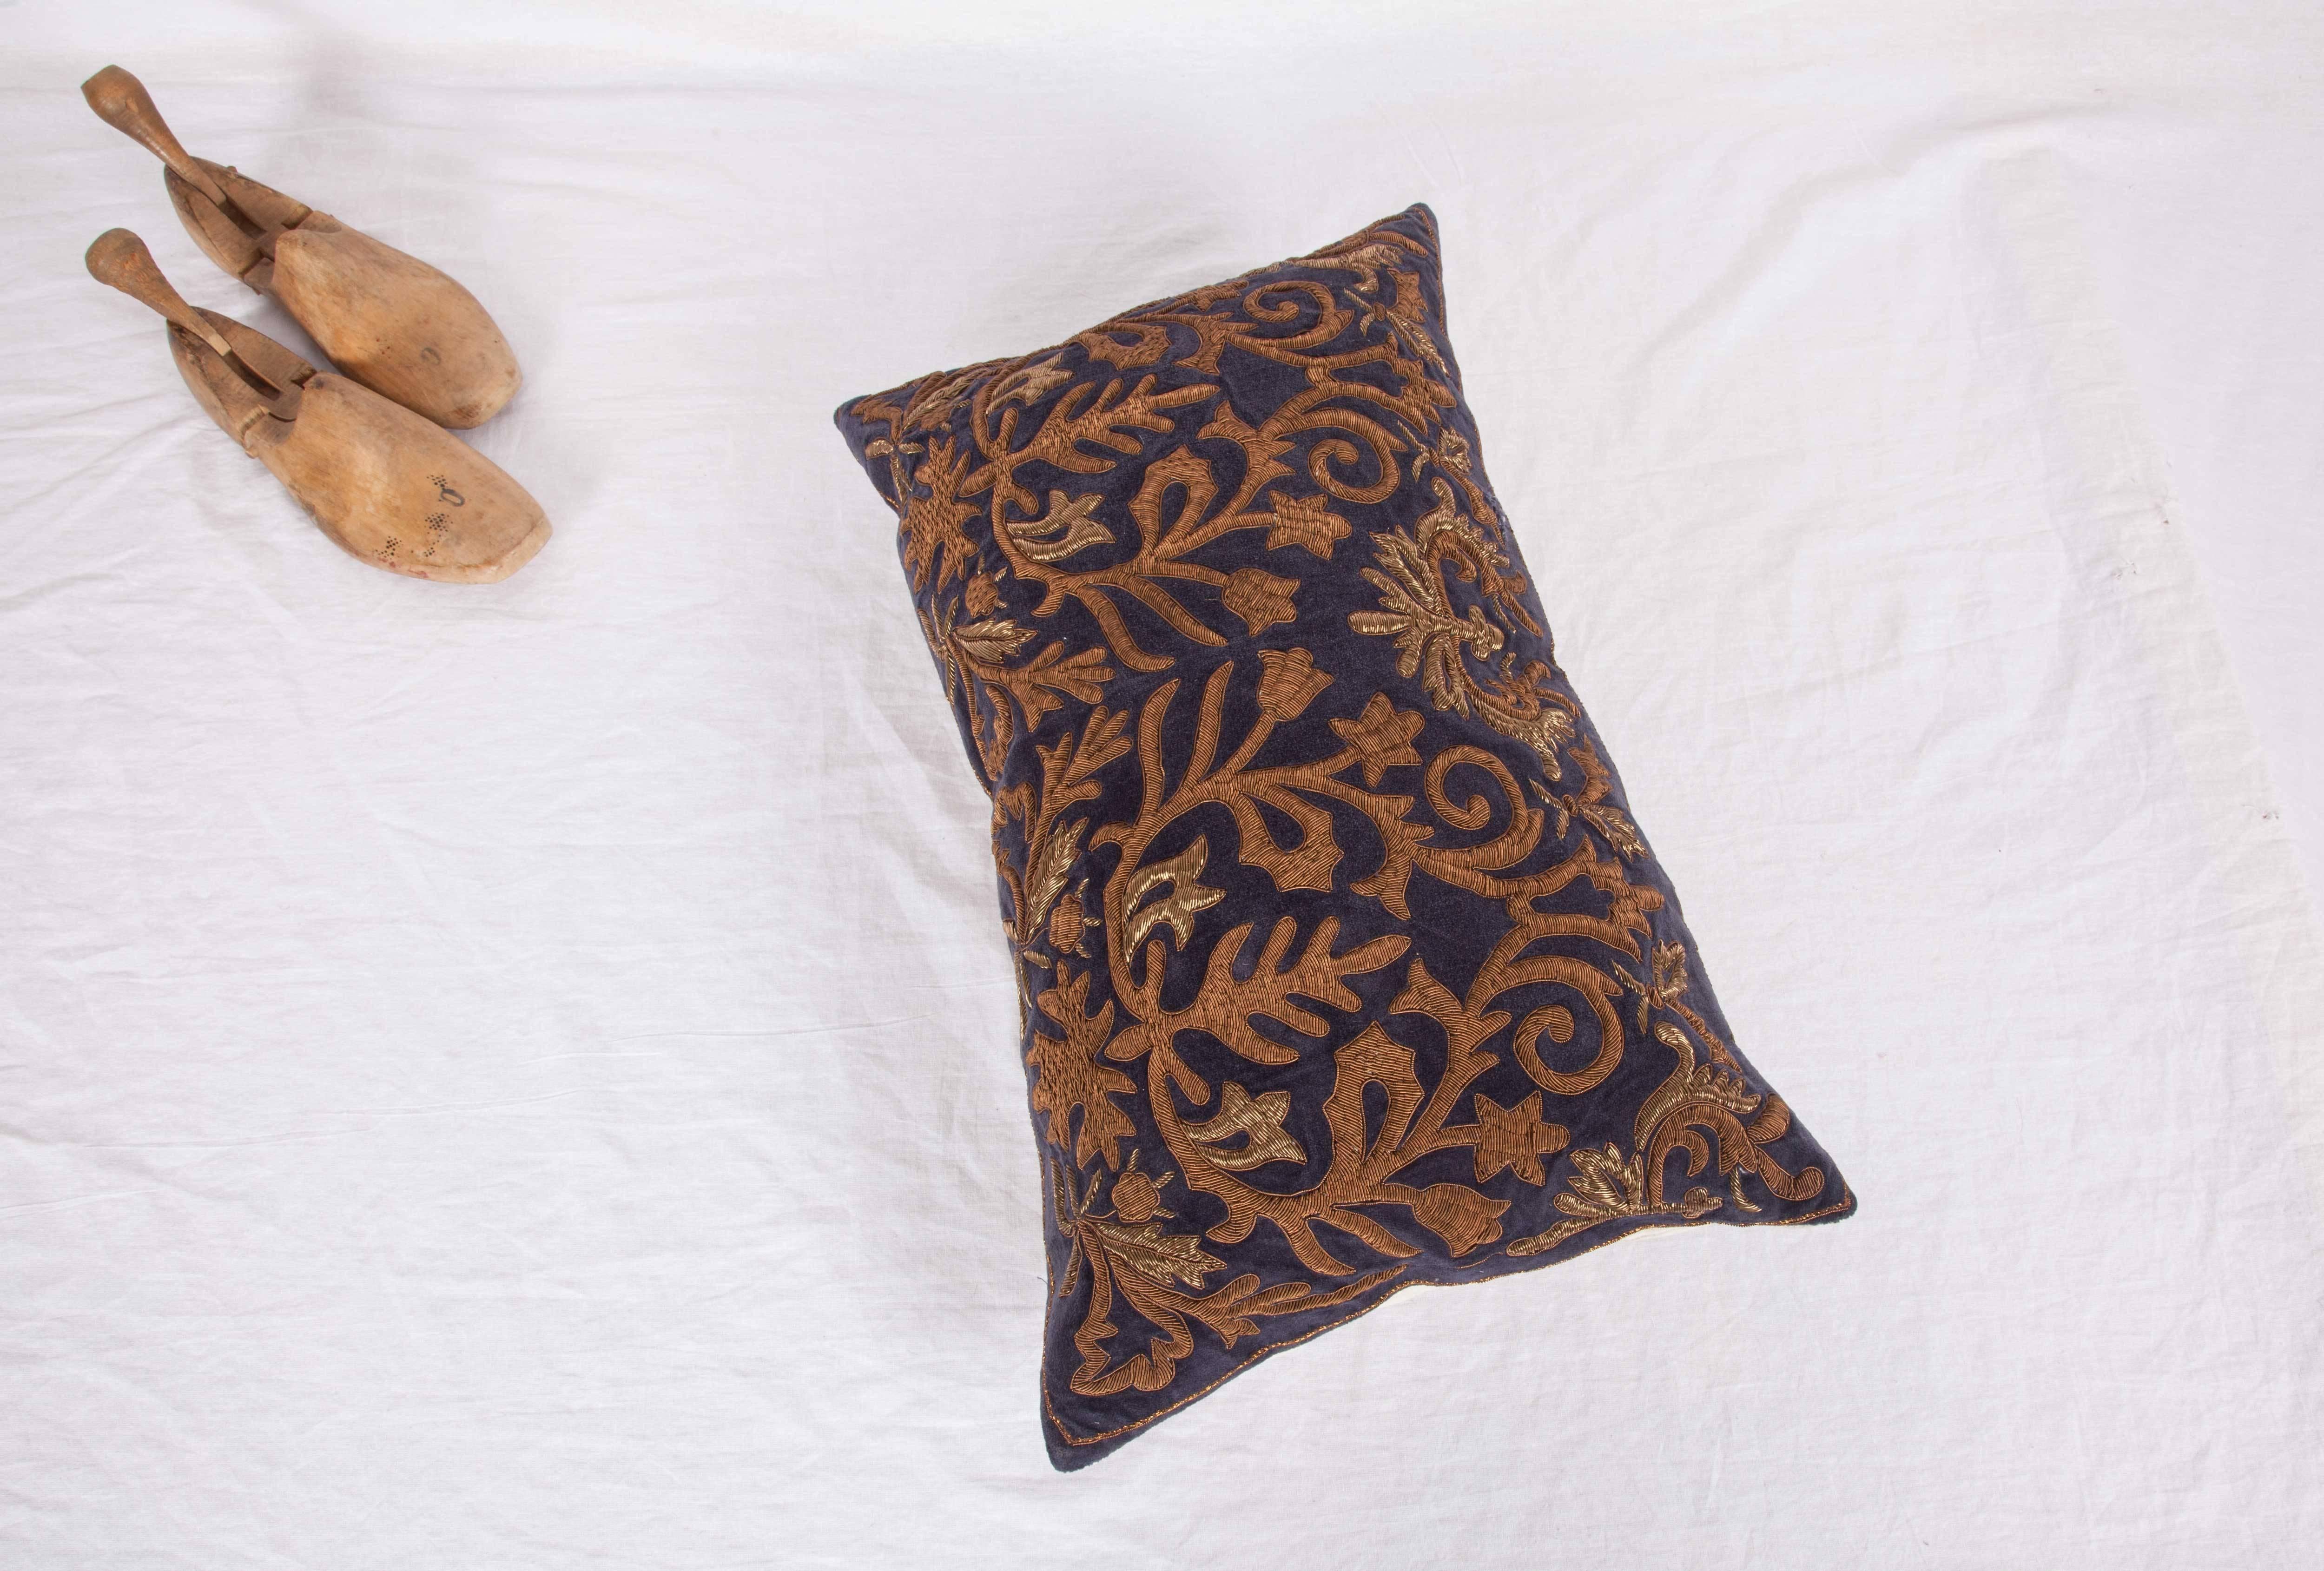 Embroidered Antique Pillow Case Made from a 19th Century European Embroidery